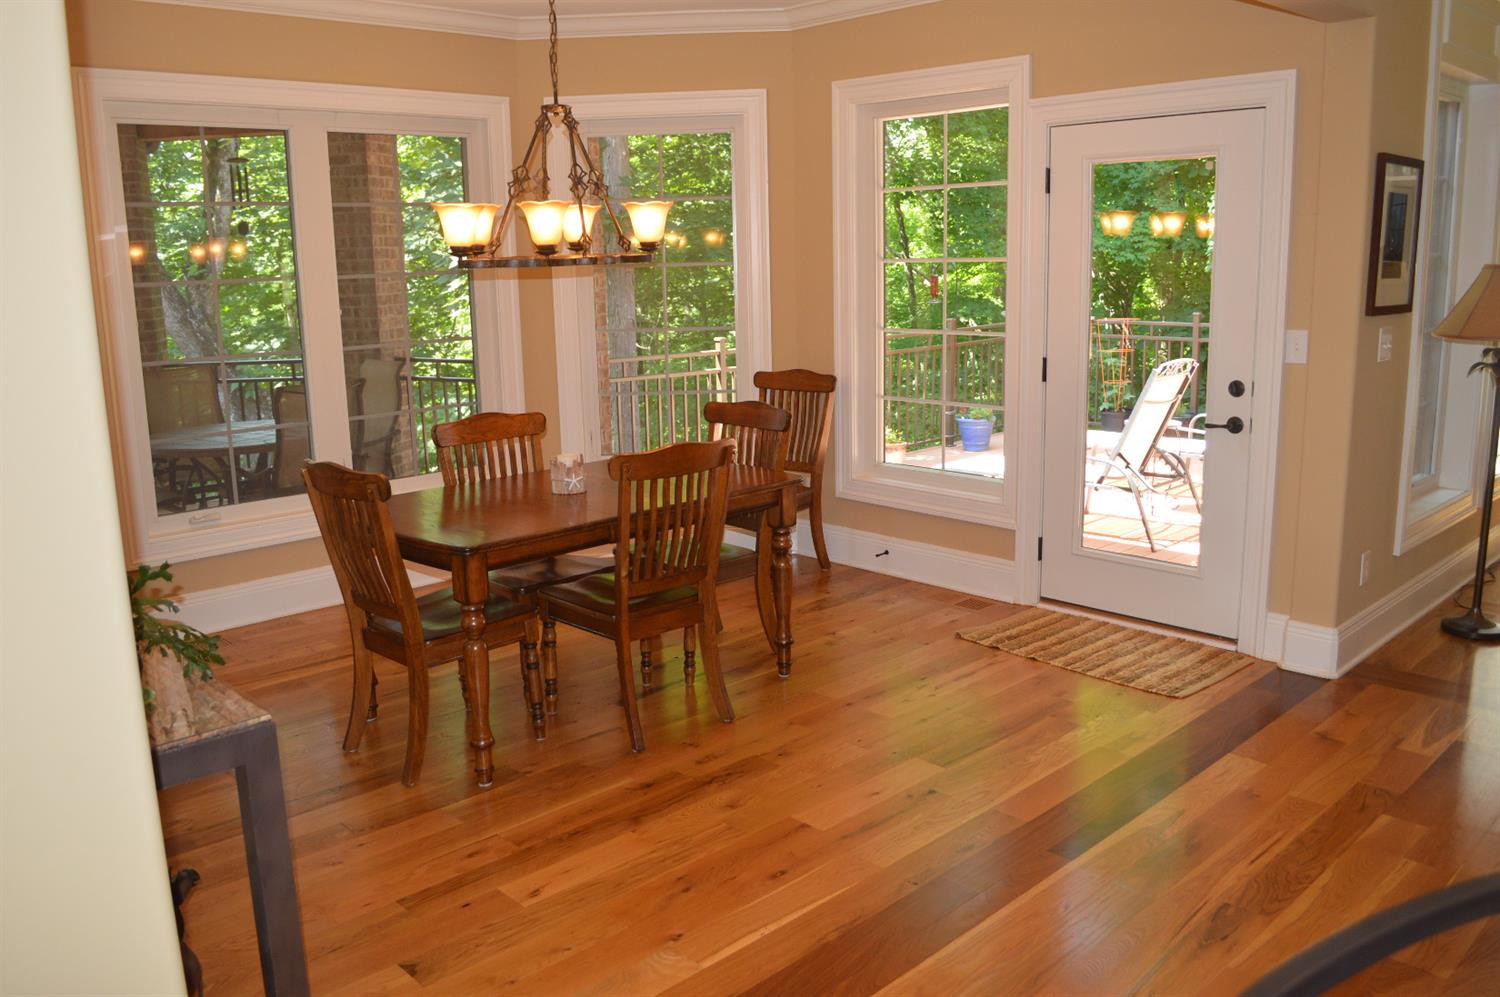 17 Spectacular Hardwood Flooring Richmond Ky 2024 free download hardwood flooring richmond ky of 316 avawam drive richmond boones trace 1813839 within property image of 316 avawam drive in richmond ky